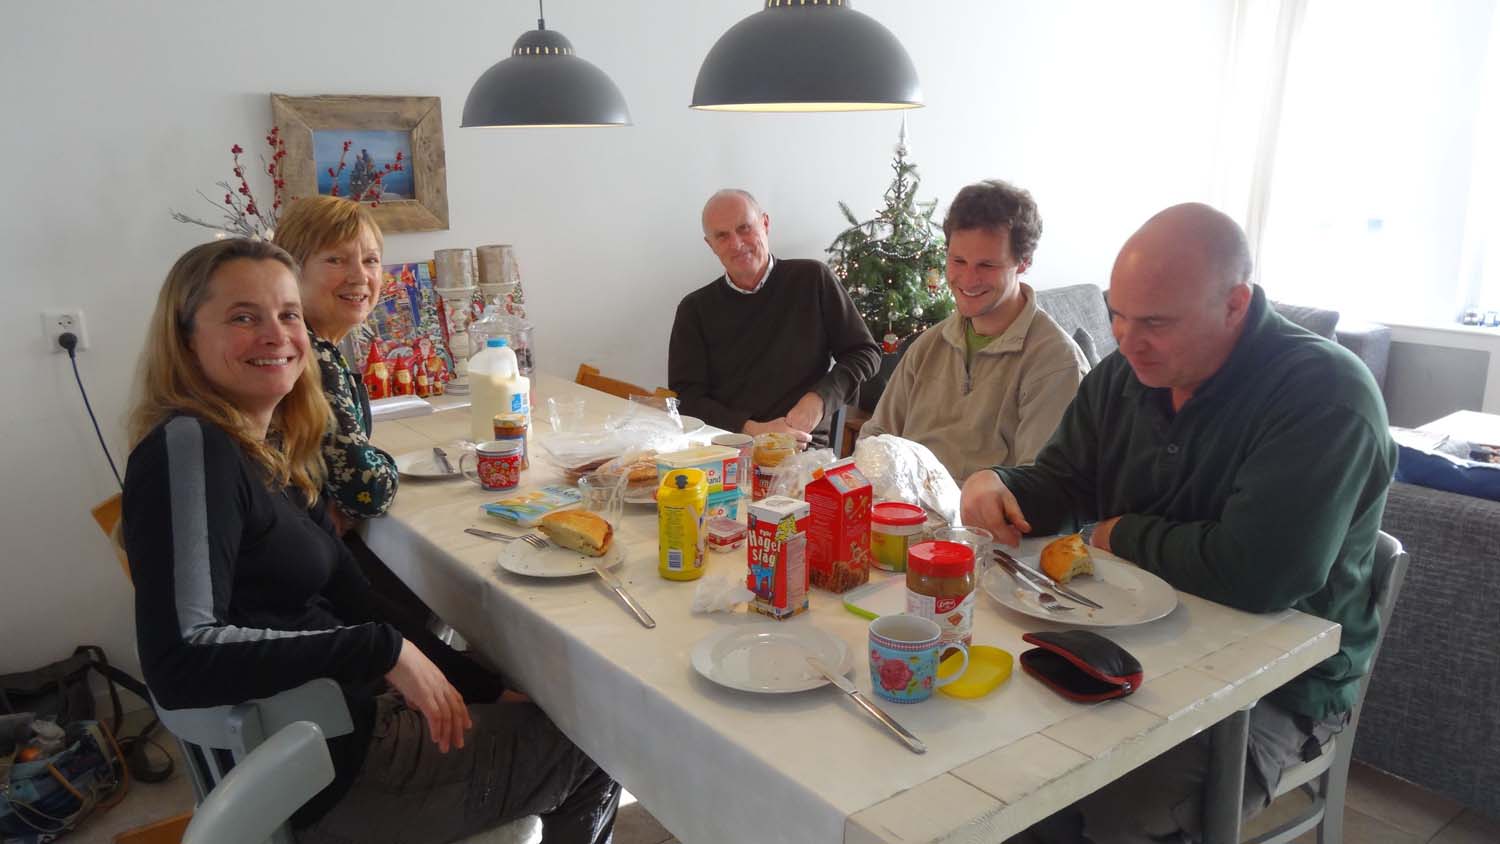 a typical Dutch lunch with Jude's mum and dad, Sandra (her sister) and Peter (brother in law)